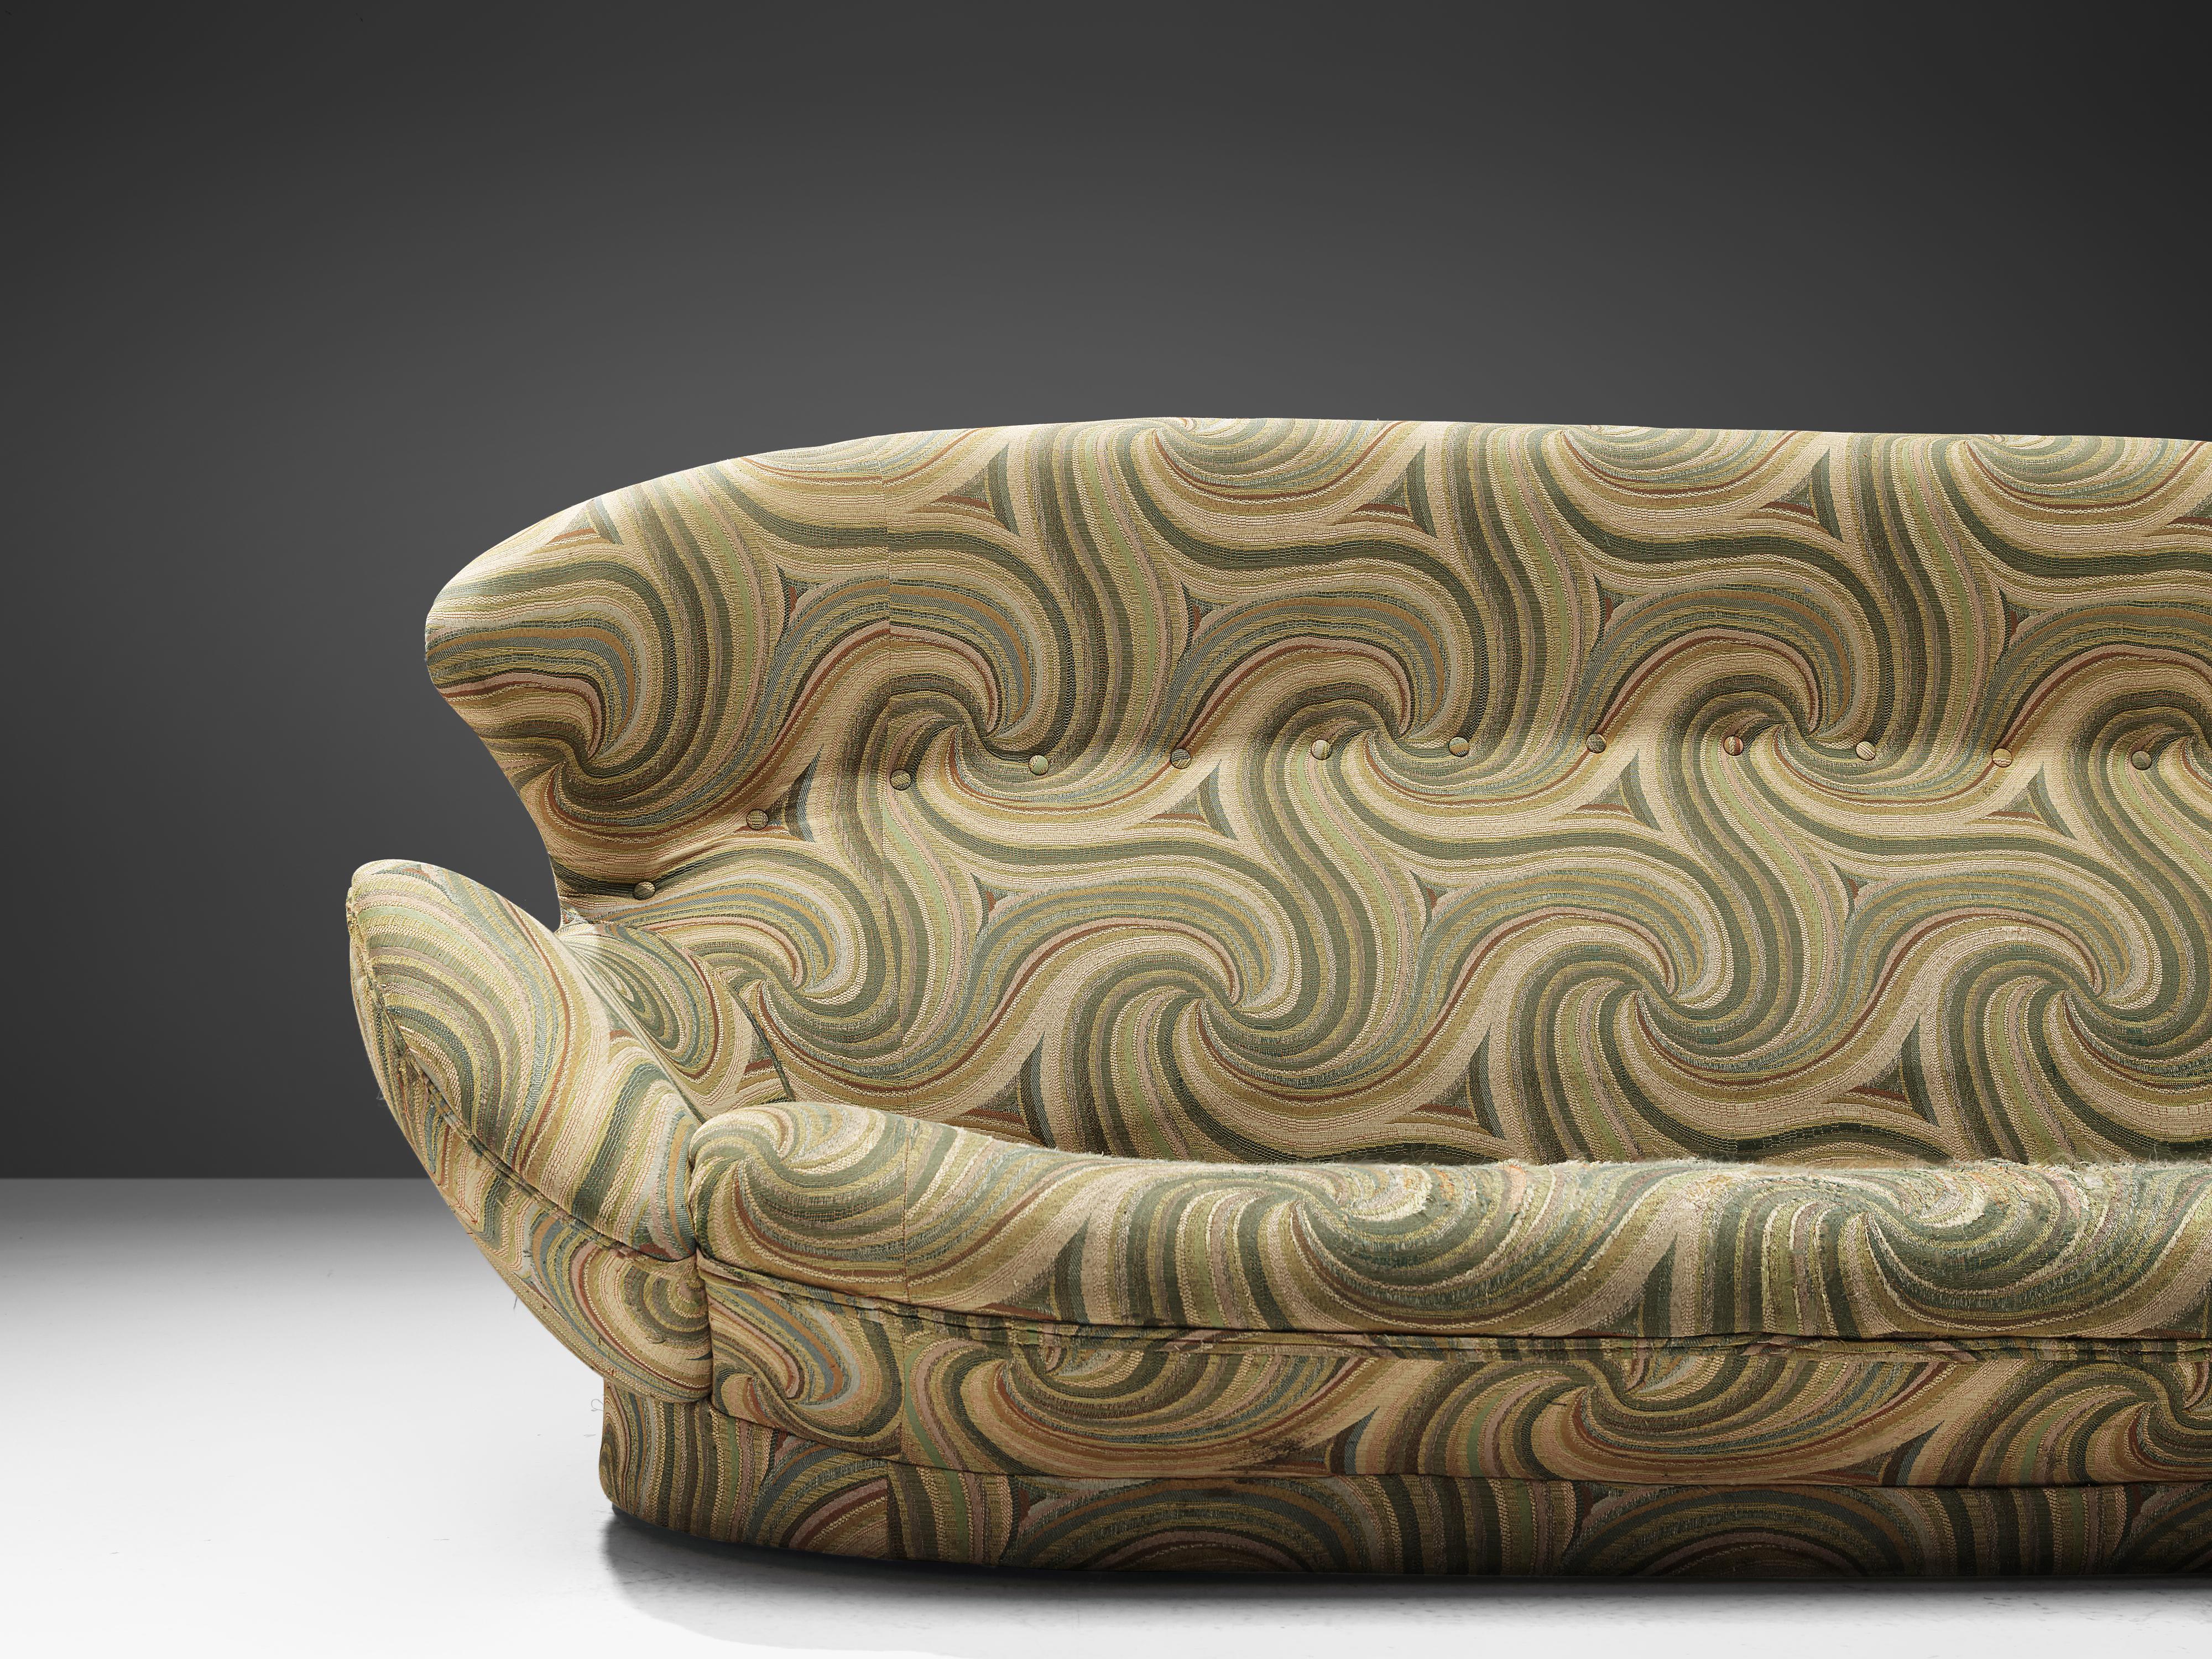 Late 20th Century Winged Sofa in Patterned Upholstery, 1970s